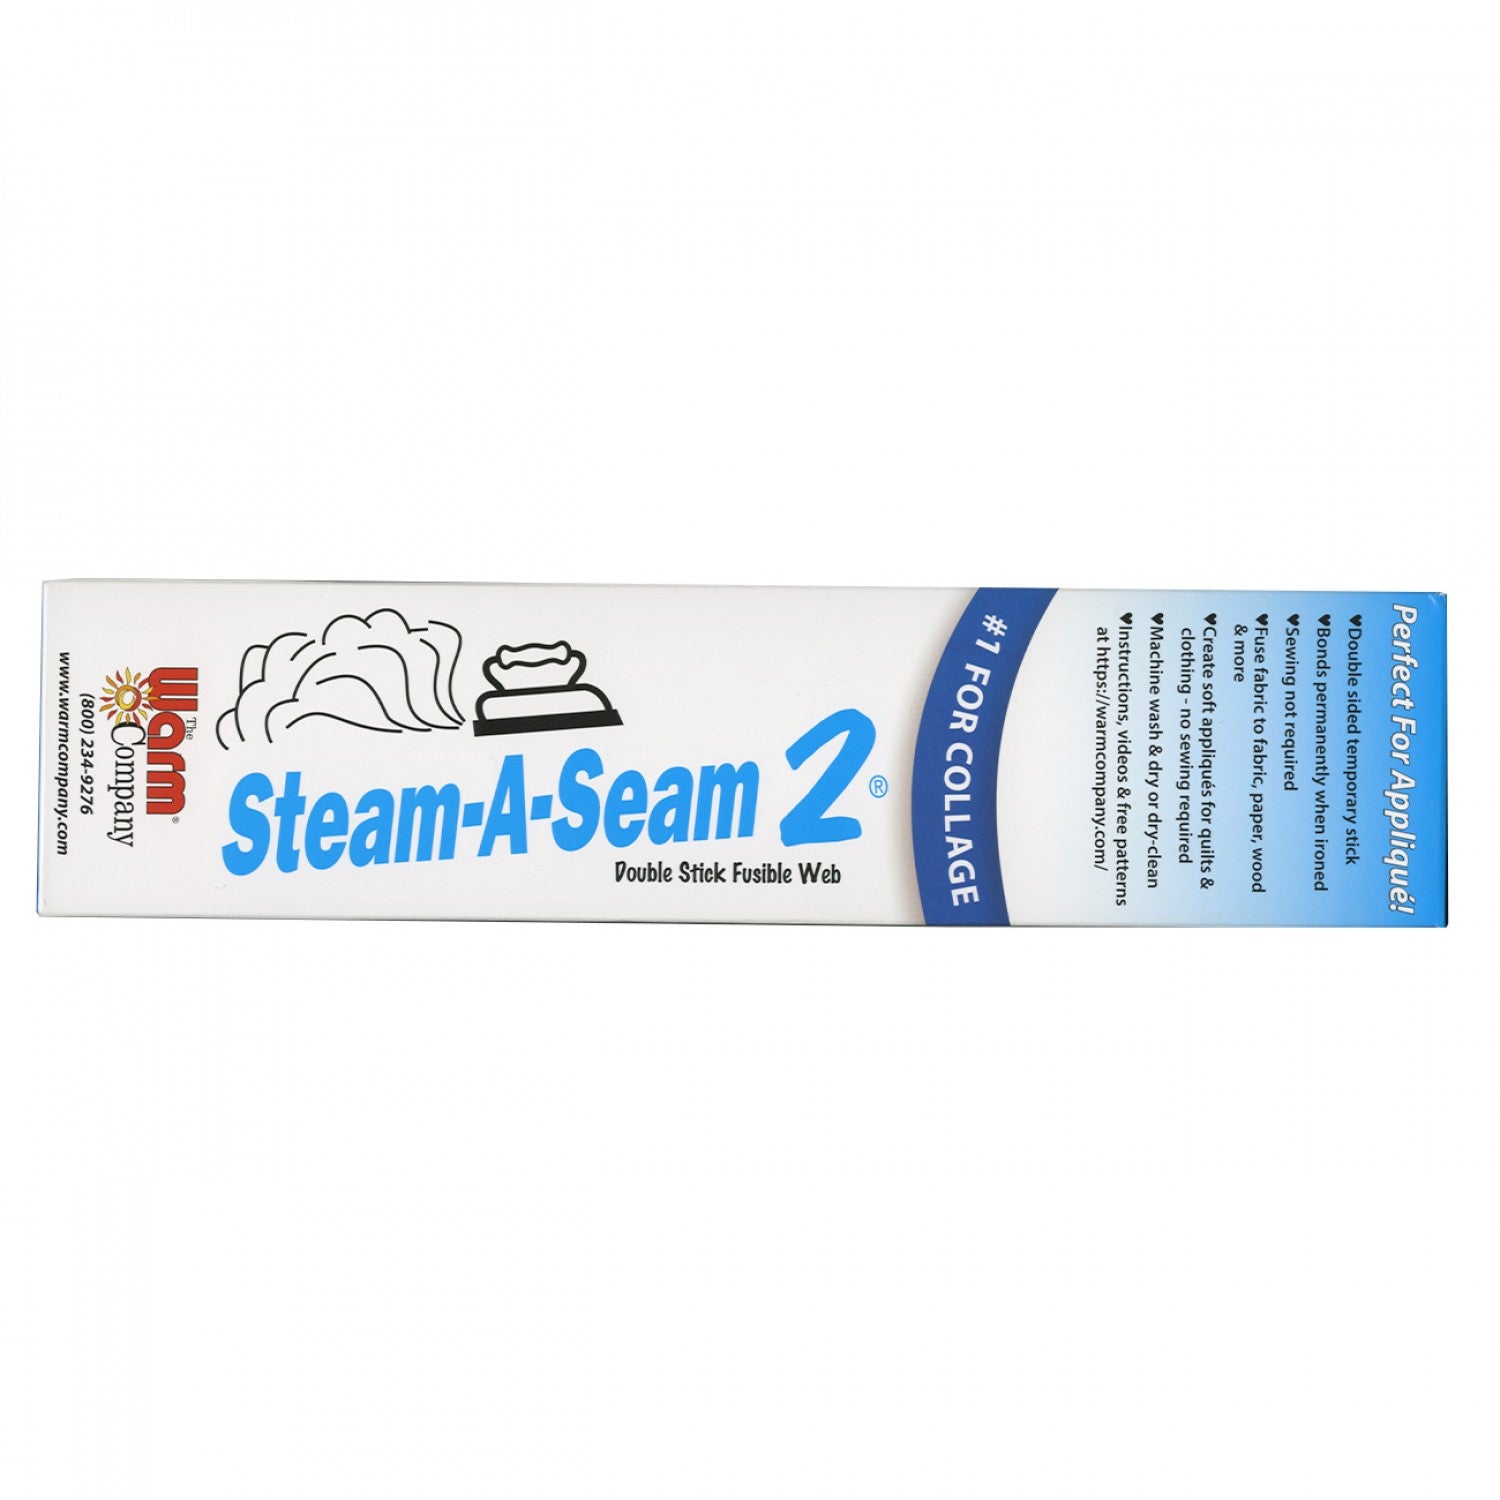 Steam-A-Seam 2 Double Stick Fusible Web 12in x 3yds from Warm Company